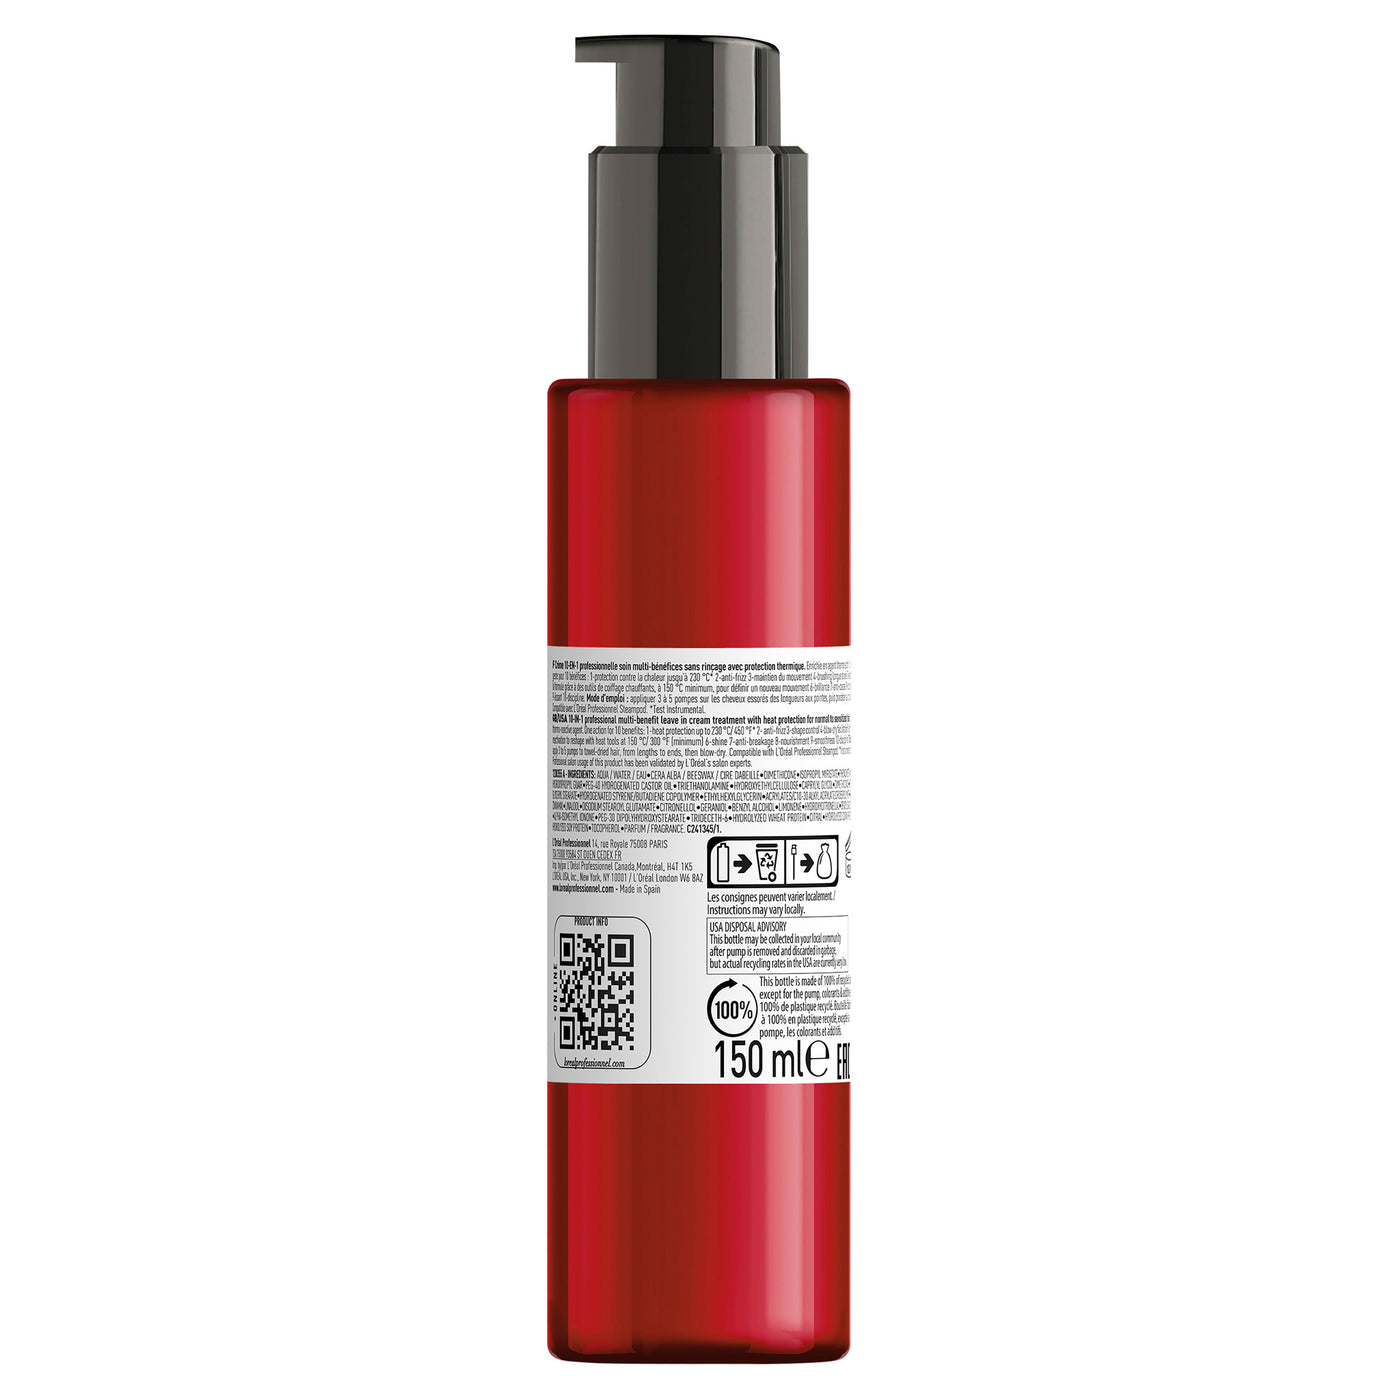 L'Oreal Professionnel Blow-dry Fluidifier 10-in-1 Leave-in Treatment 150ml